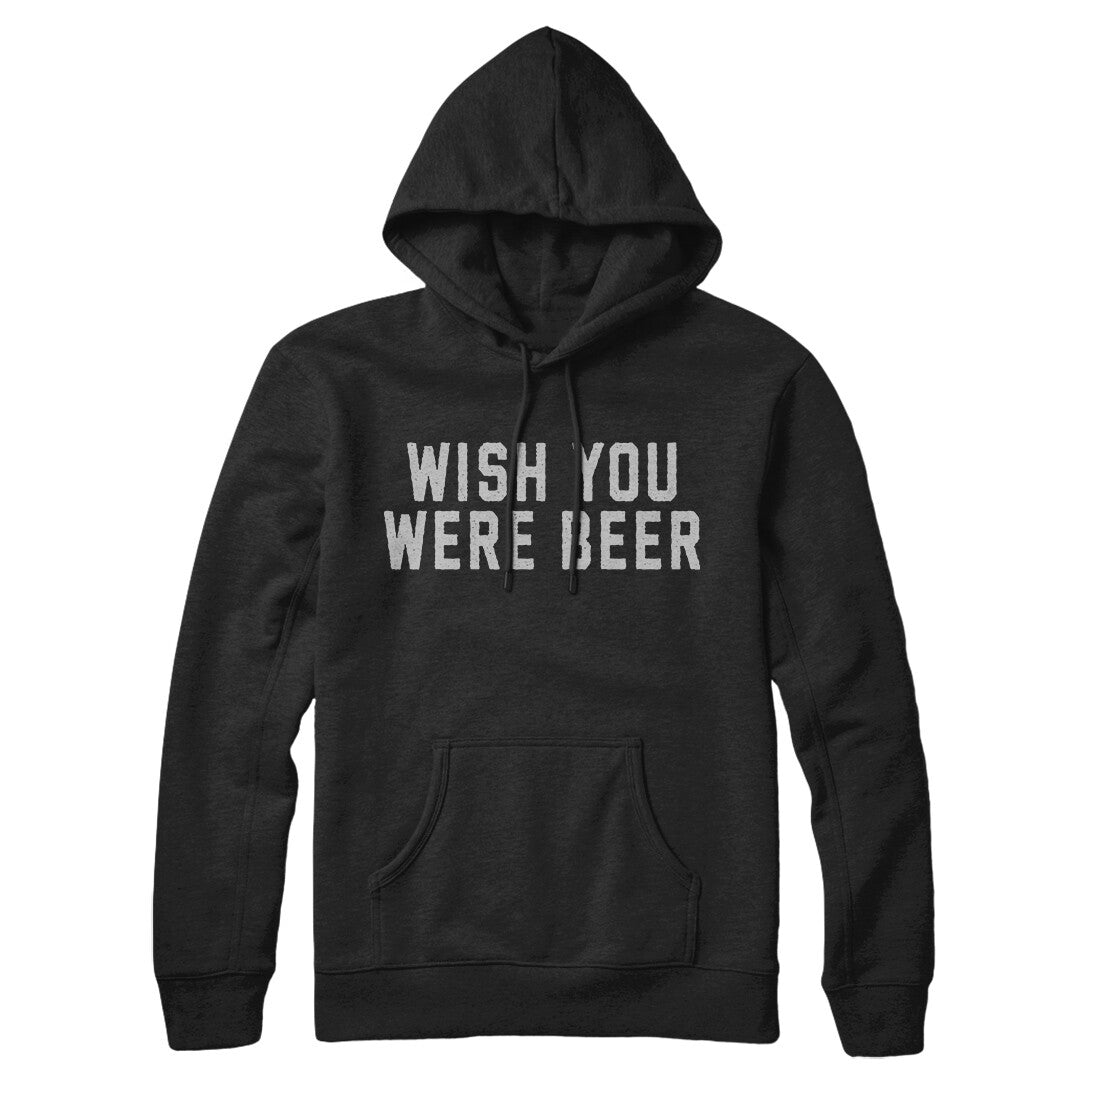 Wish You Were Beer in Black Color